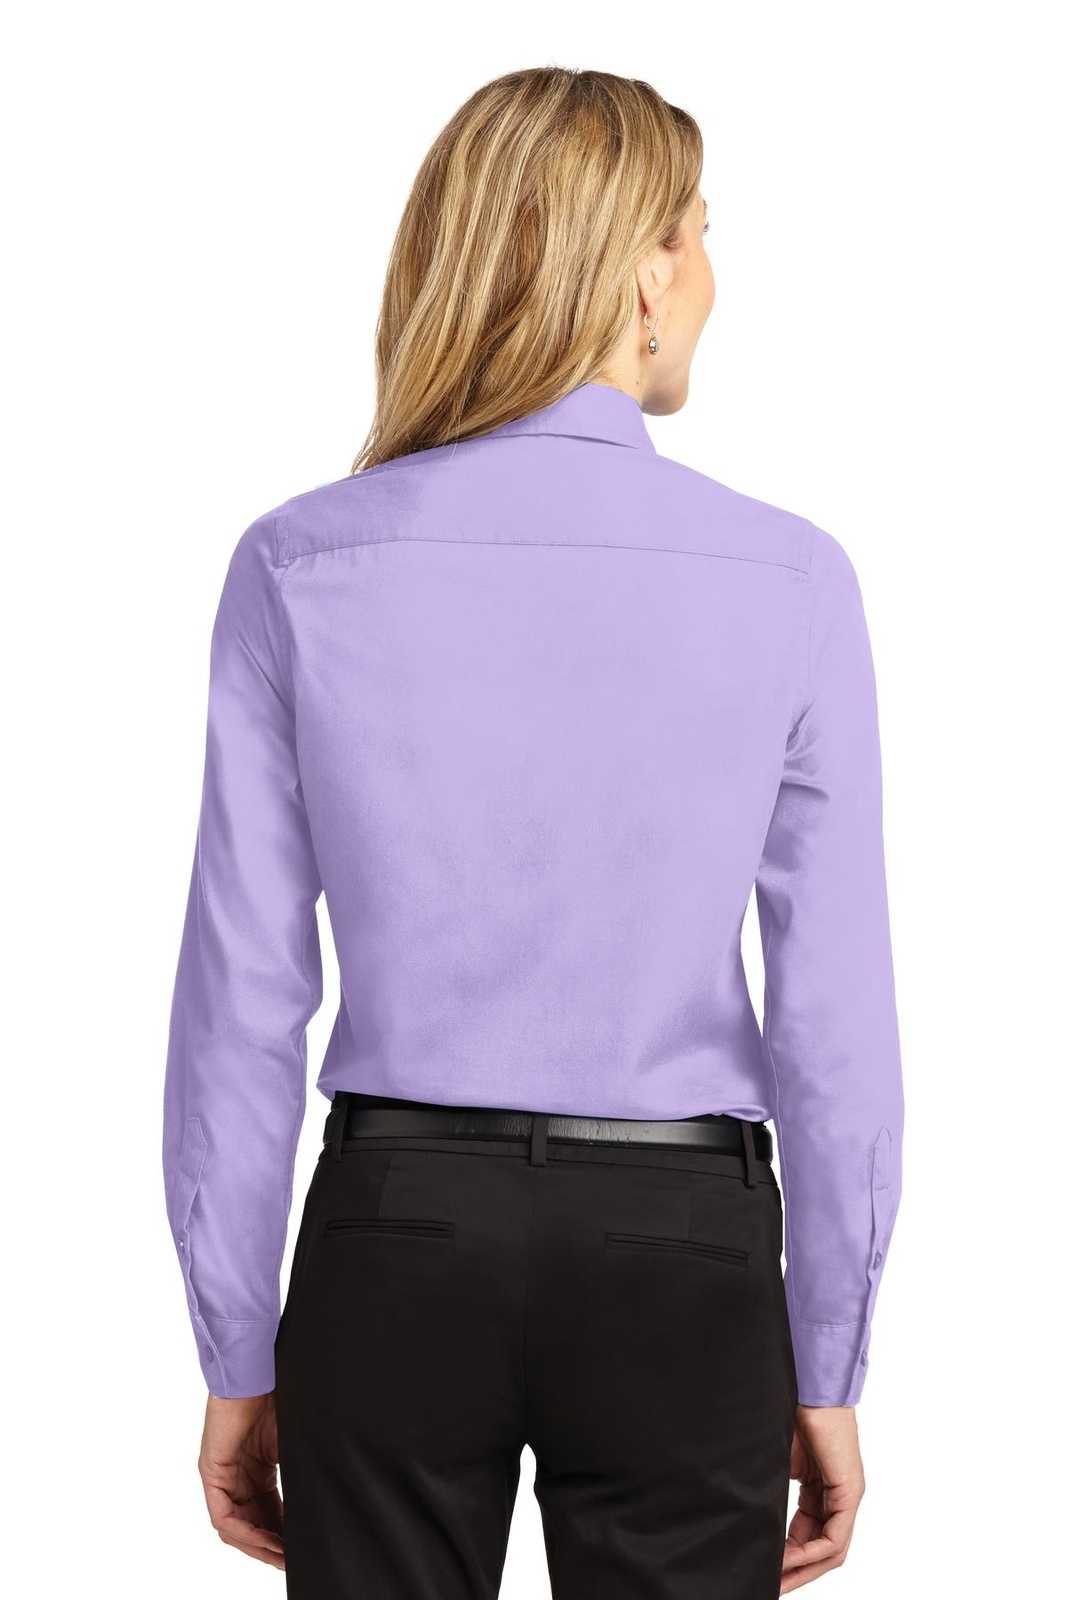 Port Authority L608 Ladies Long Sleeve Easy Care Shirt - Bright Lavender - HIT a Double - 1